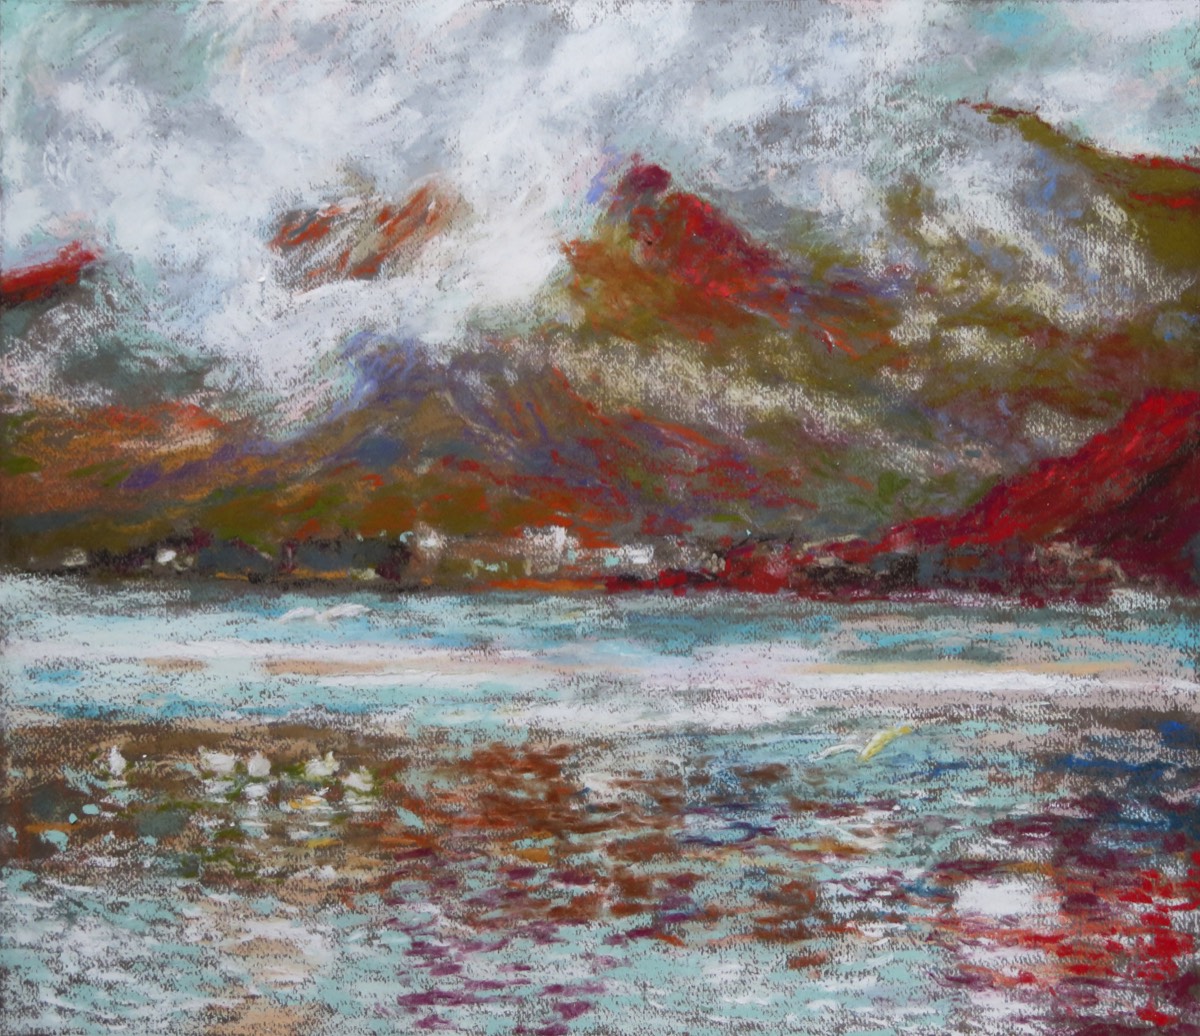 Skye from Glenelg - in the warm rain - Pastel 17.25 X 20 inches - Created 18th October 2020